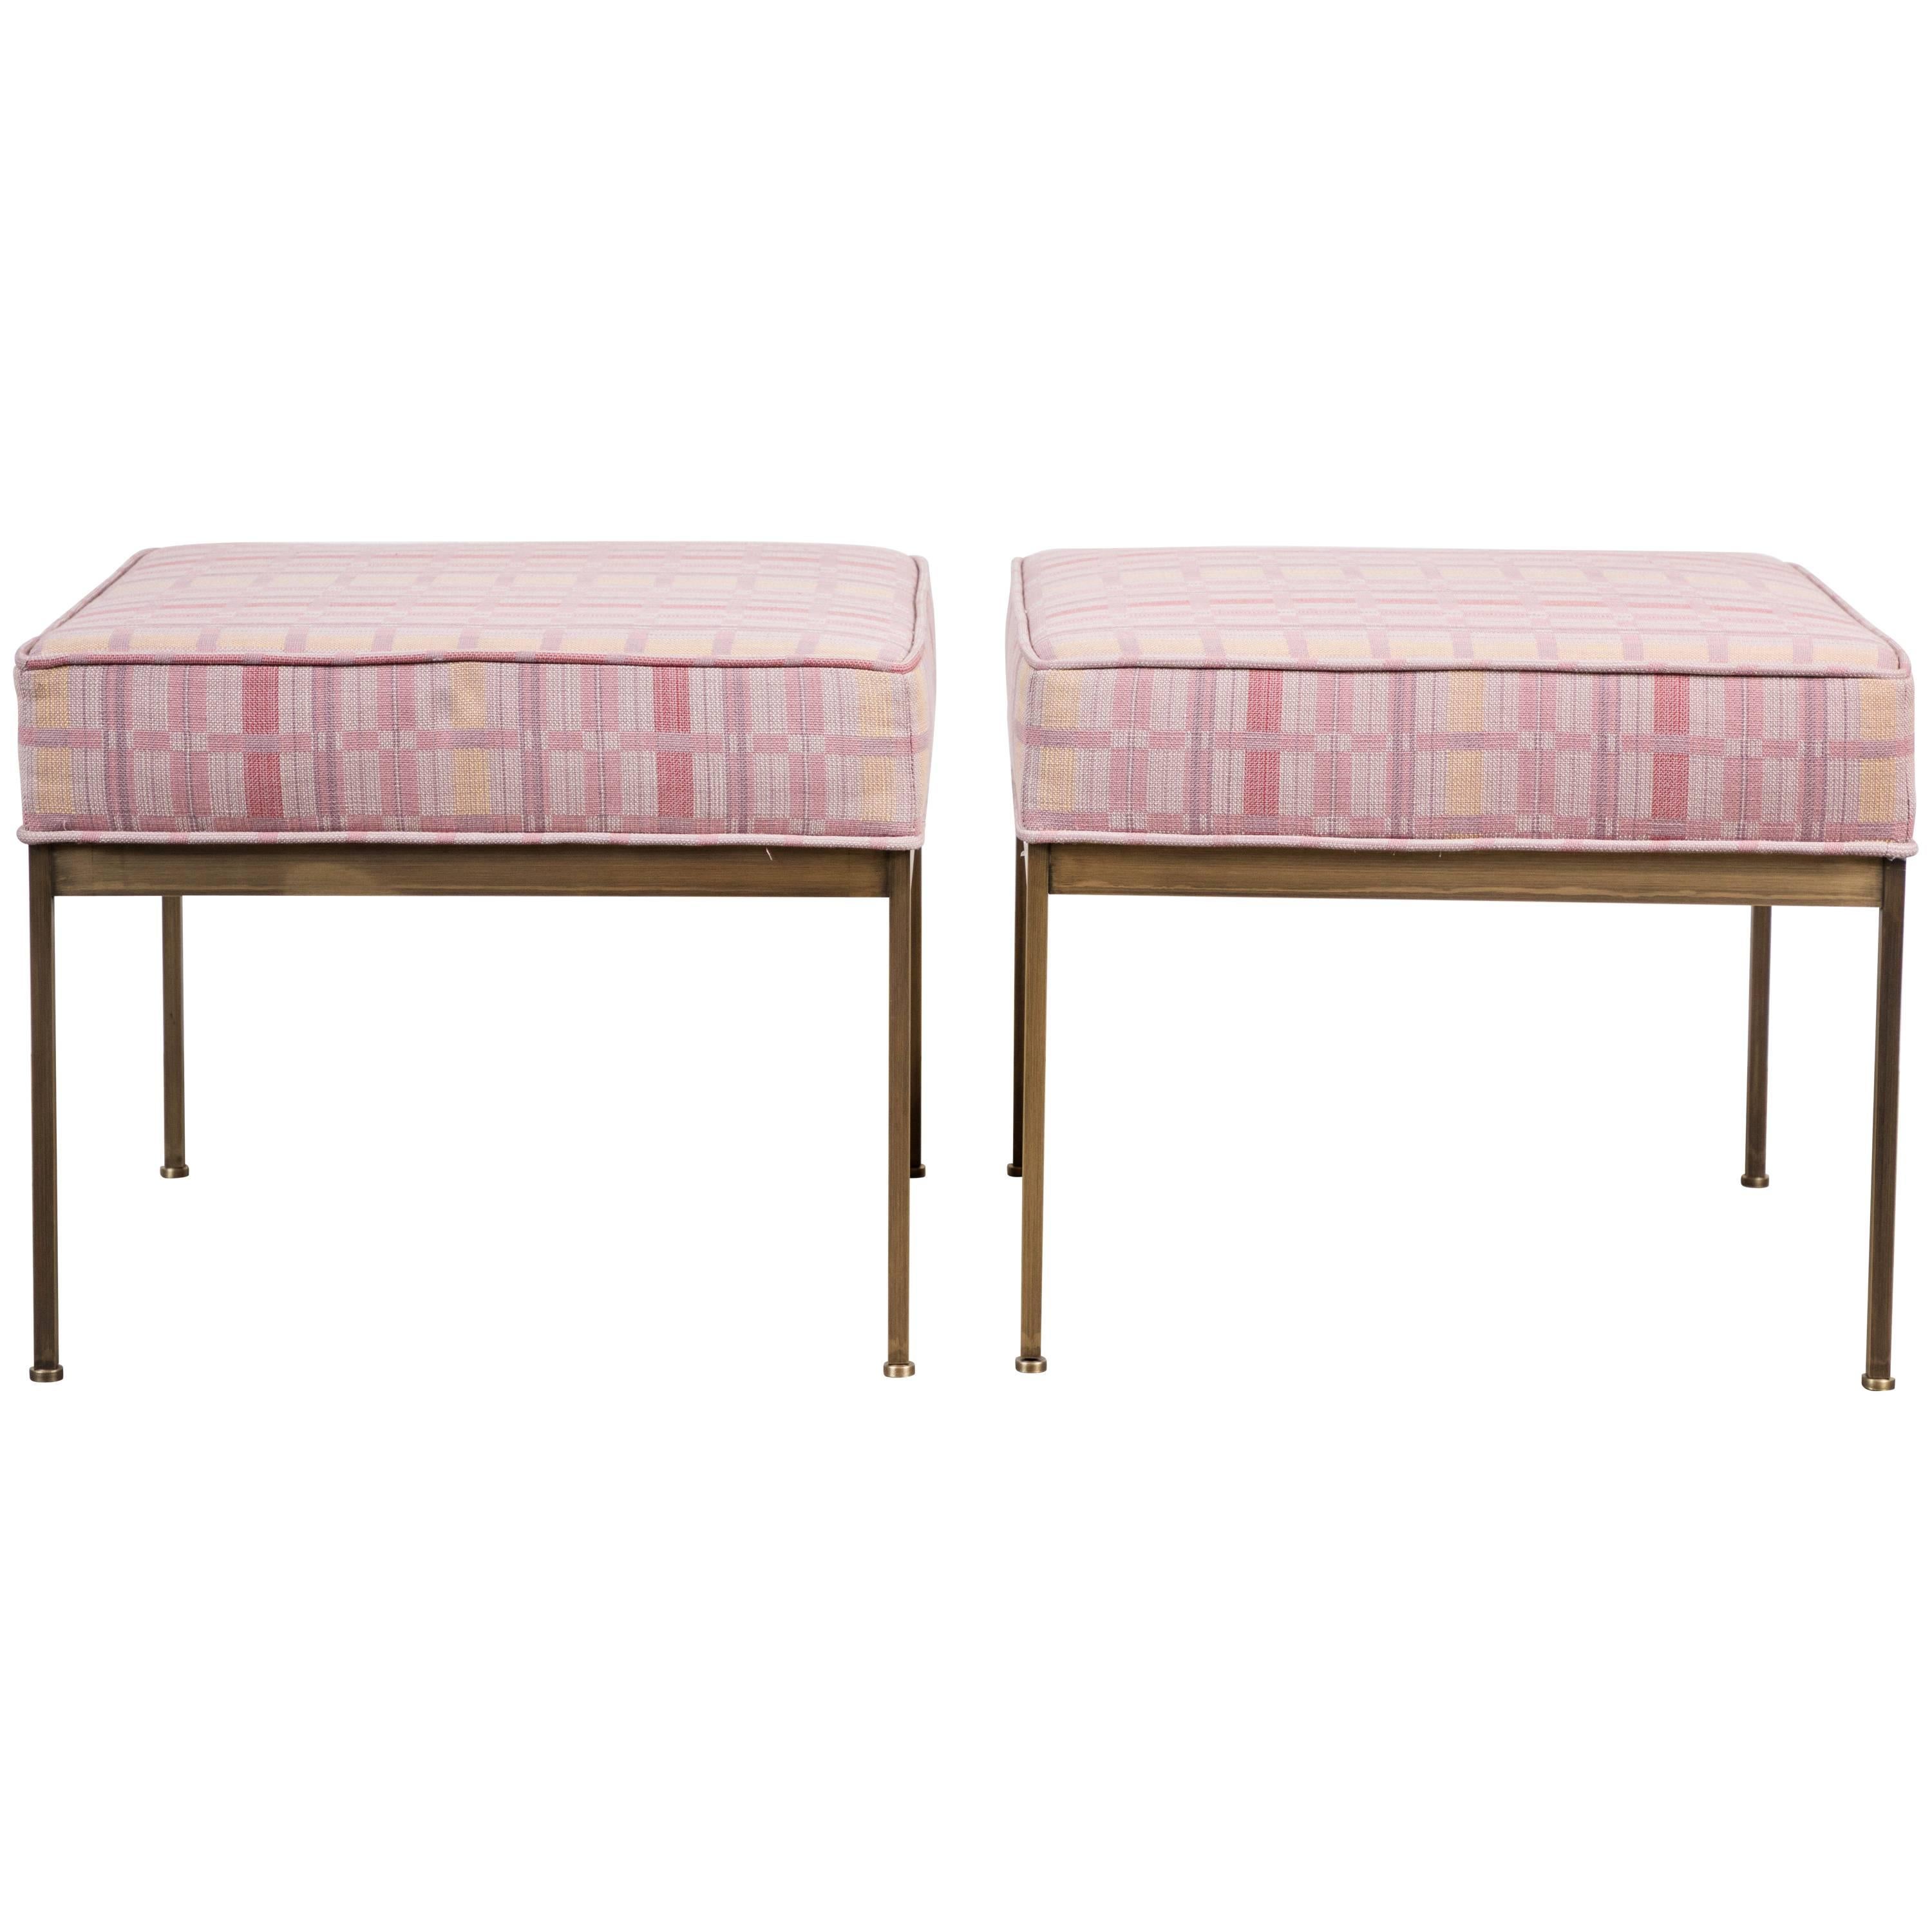 Pair of Paul Ottomans by Lawson-Fenning